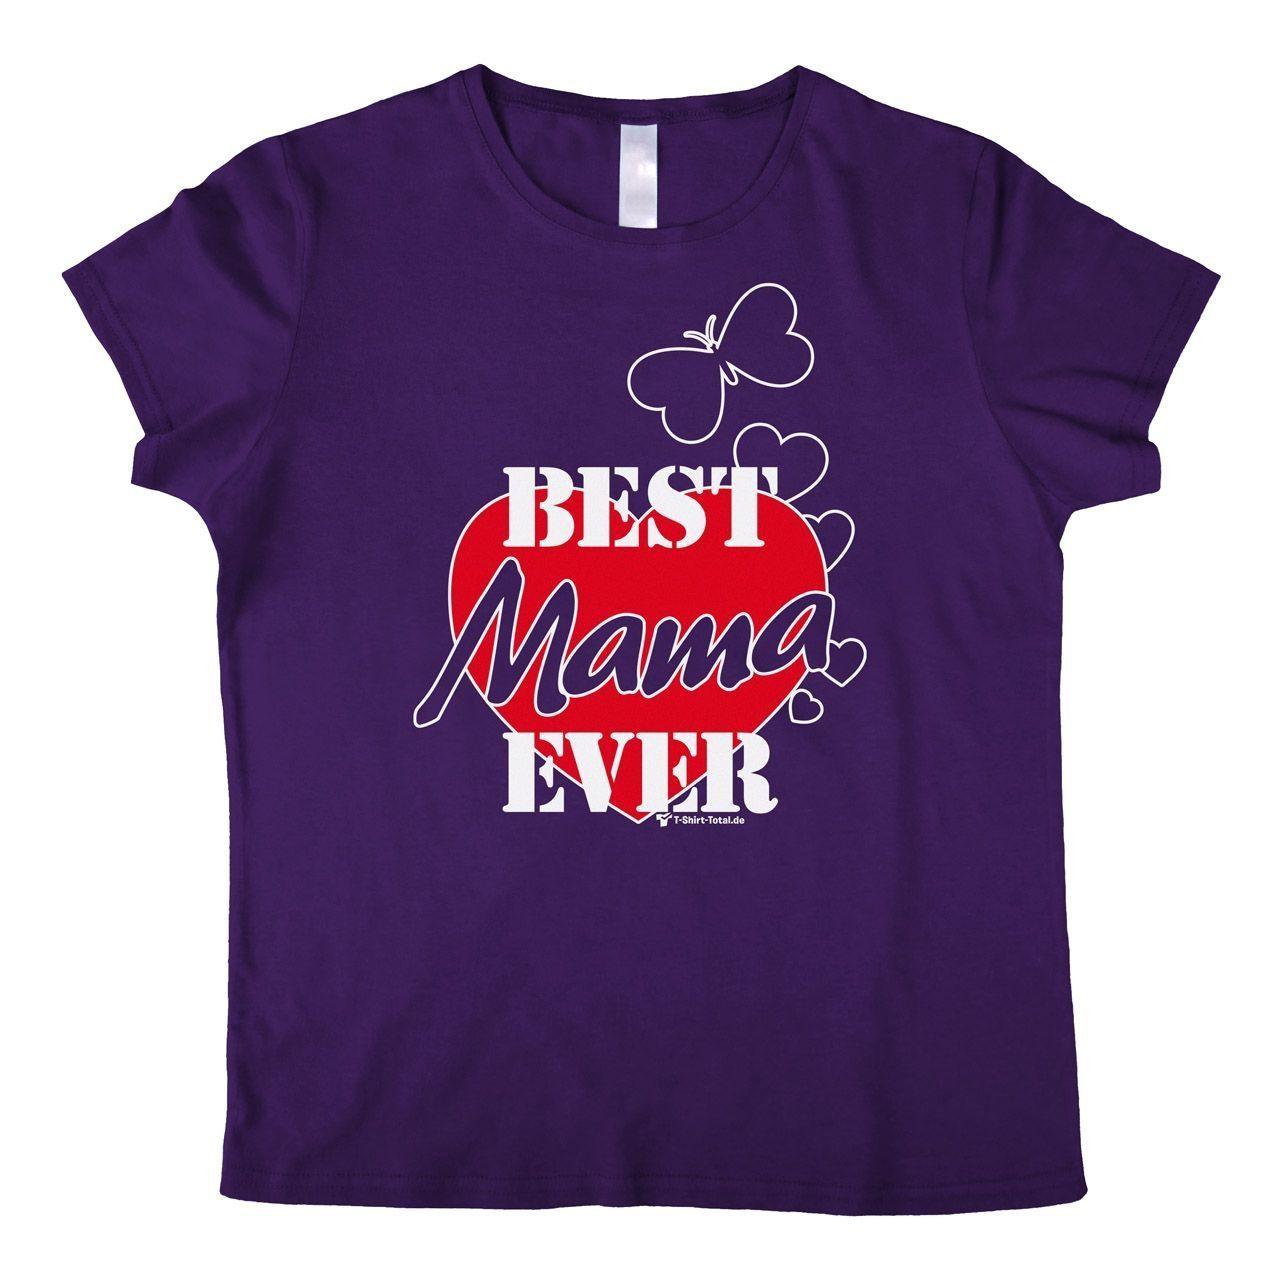 Best Mama ever Woman T-Shirt lila Extra Large